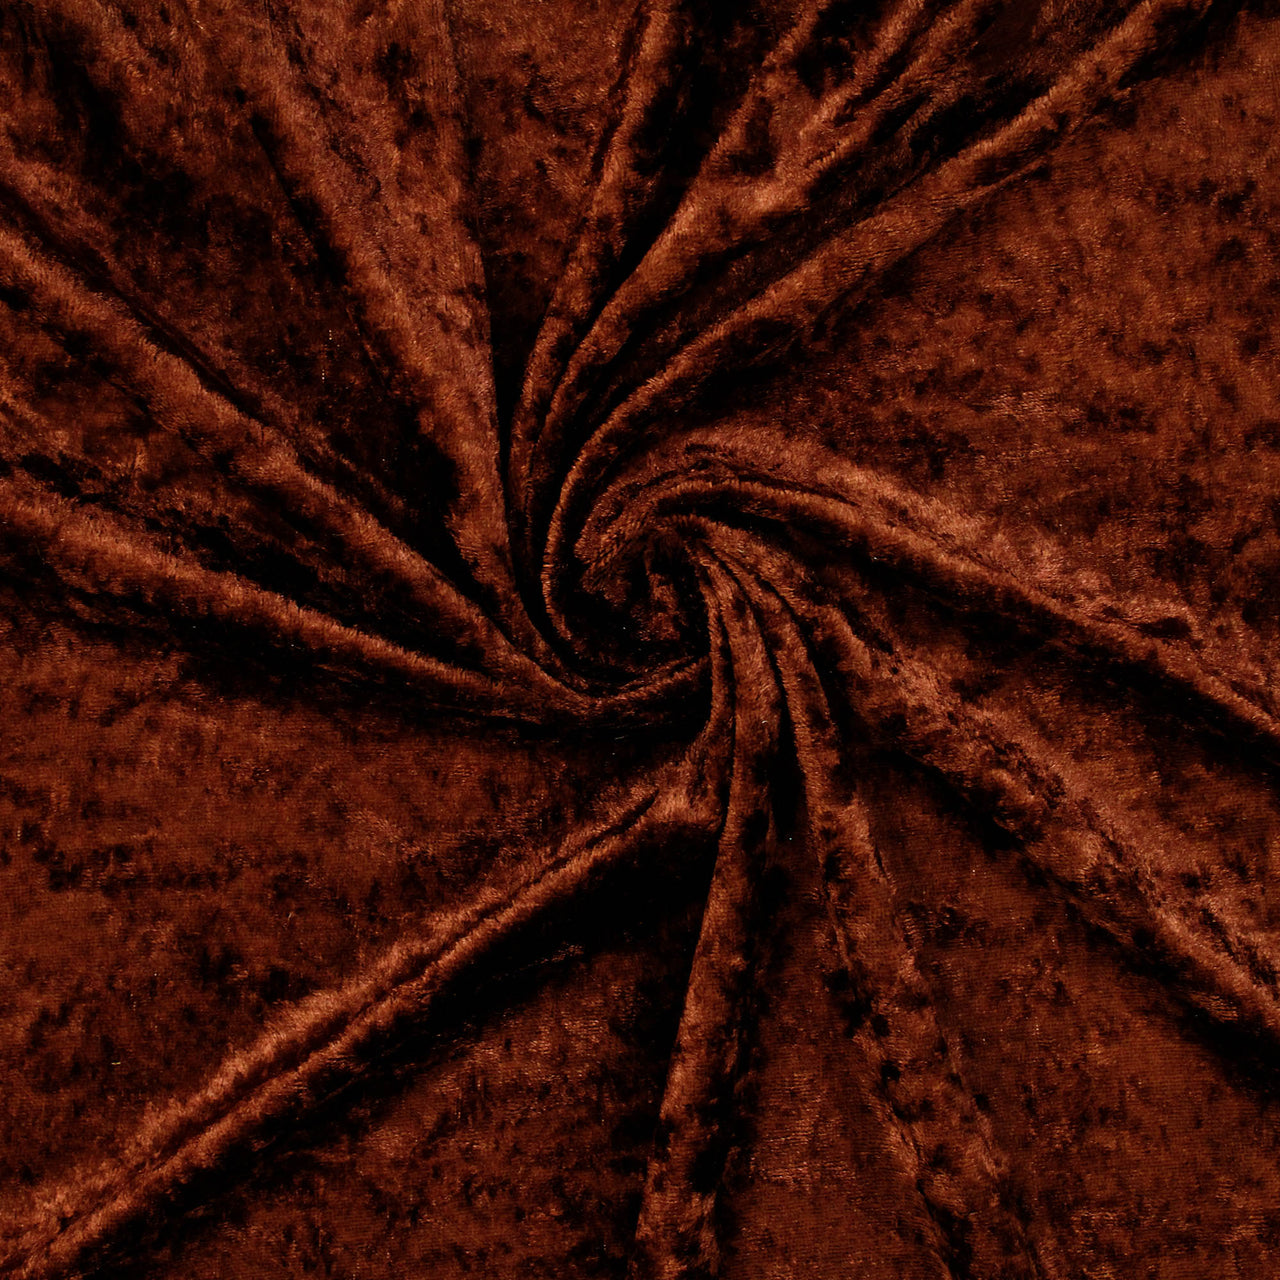 Brown - Crushed Velvet Velour Fabric - Natural One Way Stretch For Costumes & Drapes